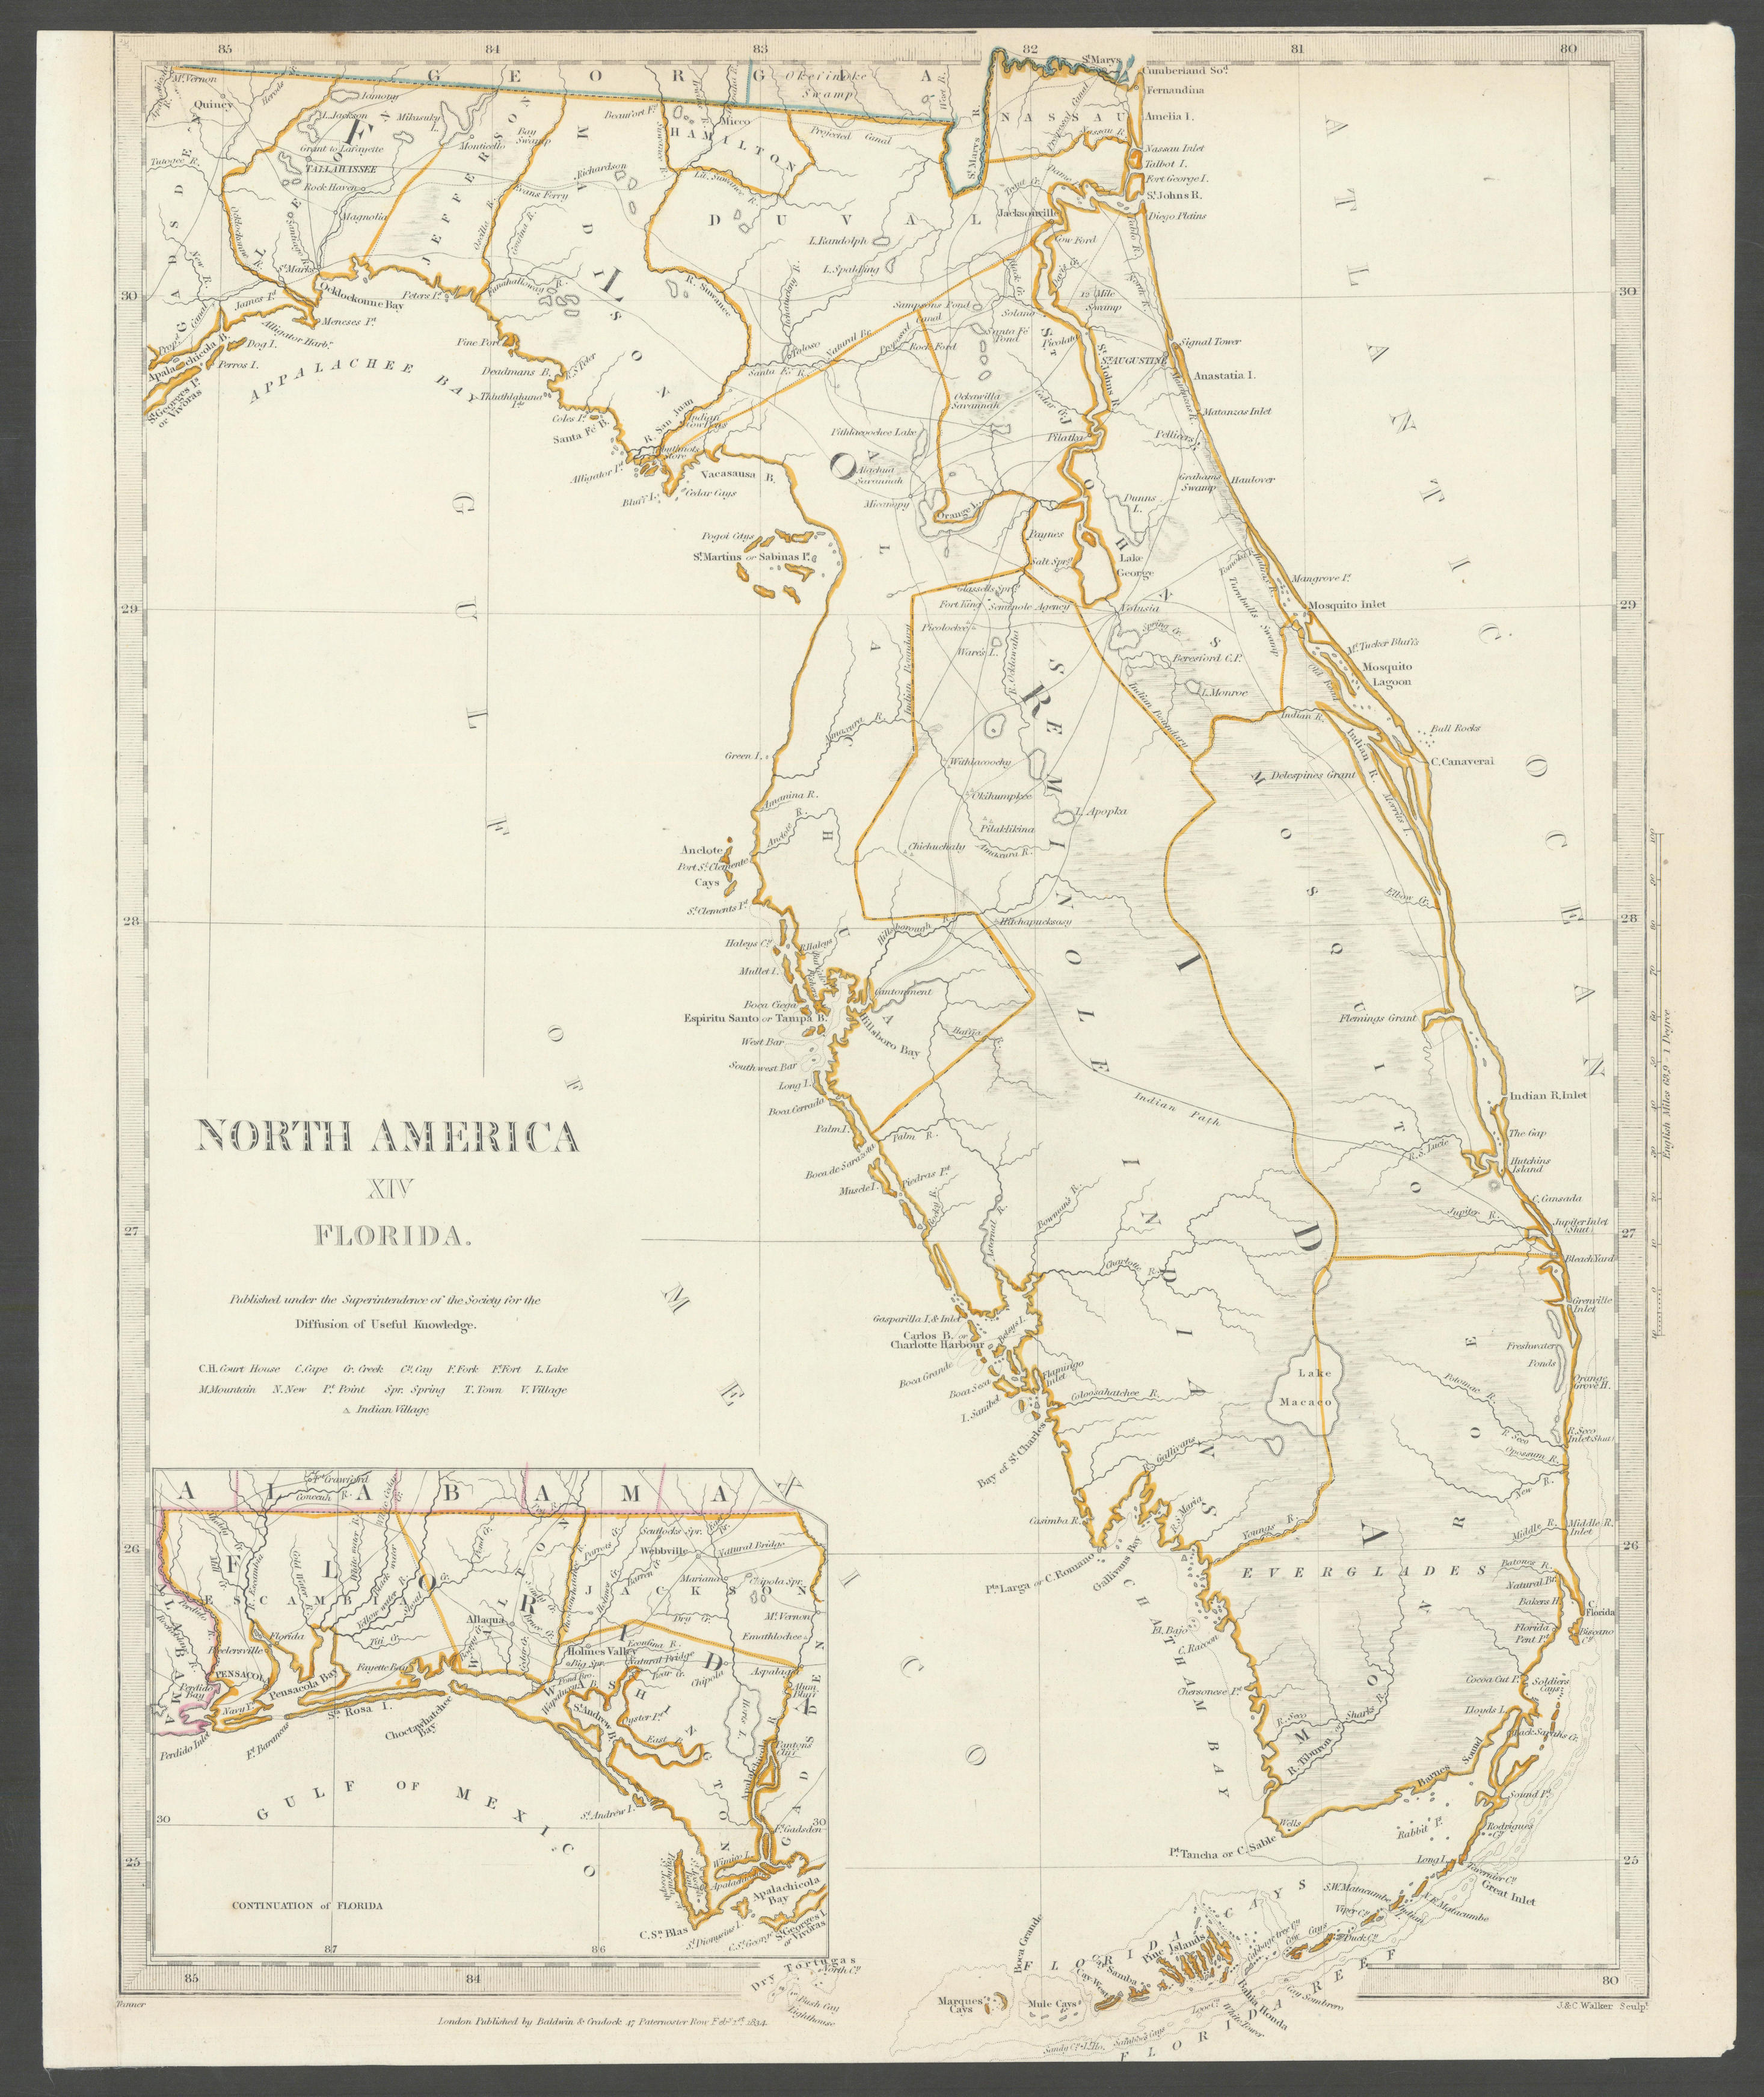 Associate Product FLORIDA. Showing Seminole Indian reservation & villages.SDUK 1844 old map